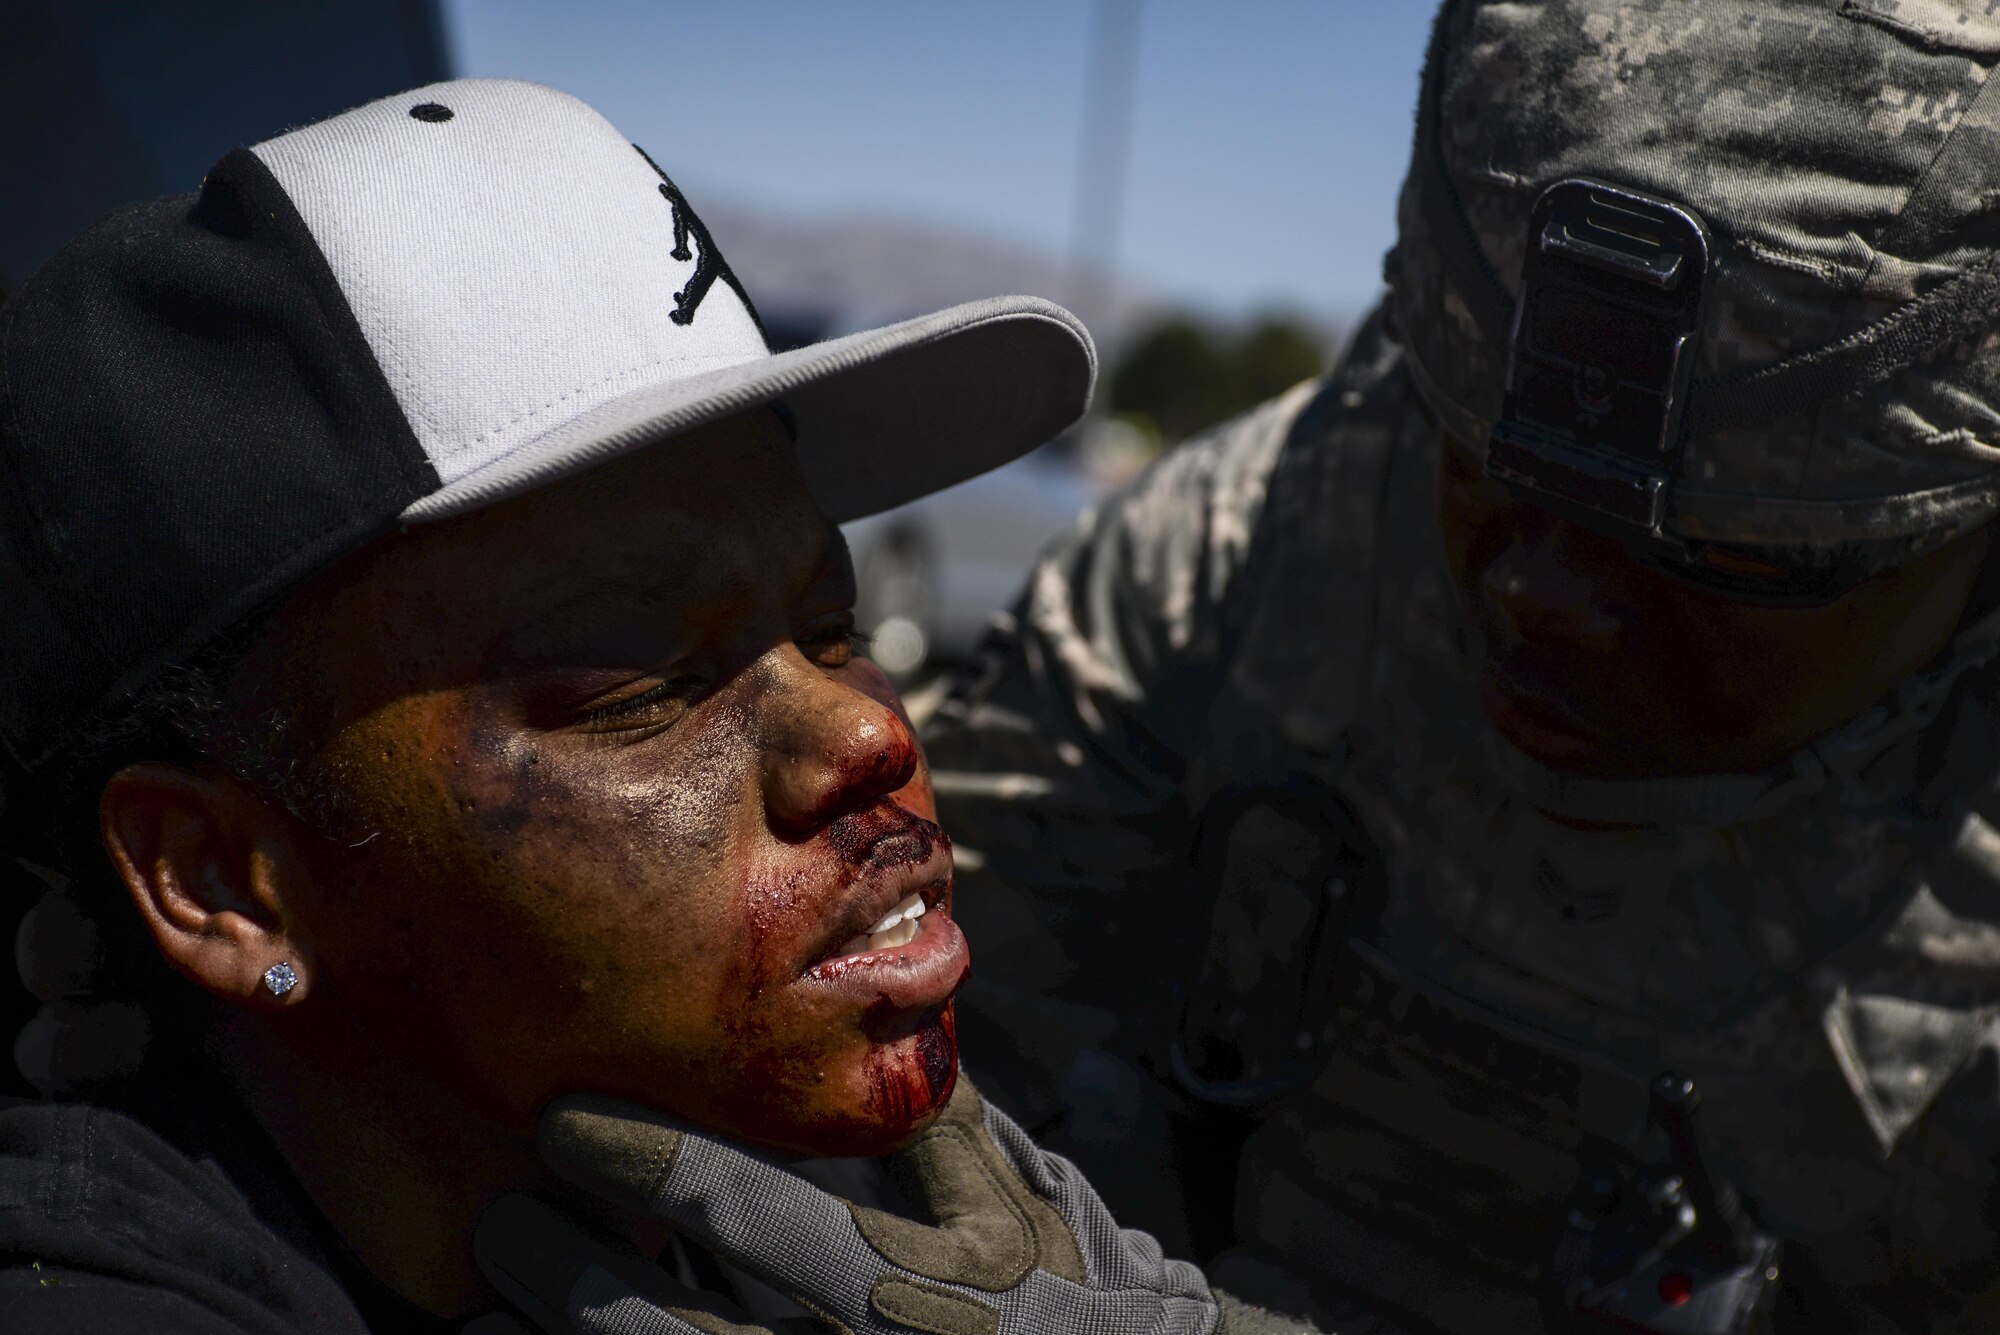 Senior Airman Terran Alexander, 99th Security Forces Squadron, checks wounds on a simulated victim during a base exercise at Nellis Air Force Base, Nev., May 12, 2016. Usually being the first ones on the scene of an emergency situation on base 99th SFS has a wide range of responsibilities, including handling the shooter and taking care of victims. (U.S. Air Force photo by Airman 1st Class Kevin Tanenbaum)